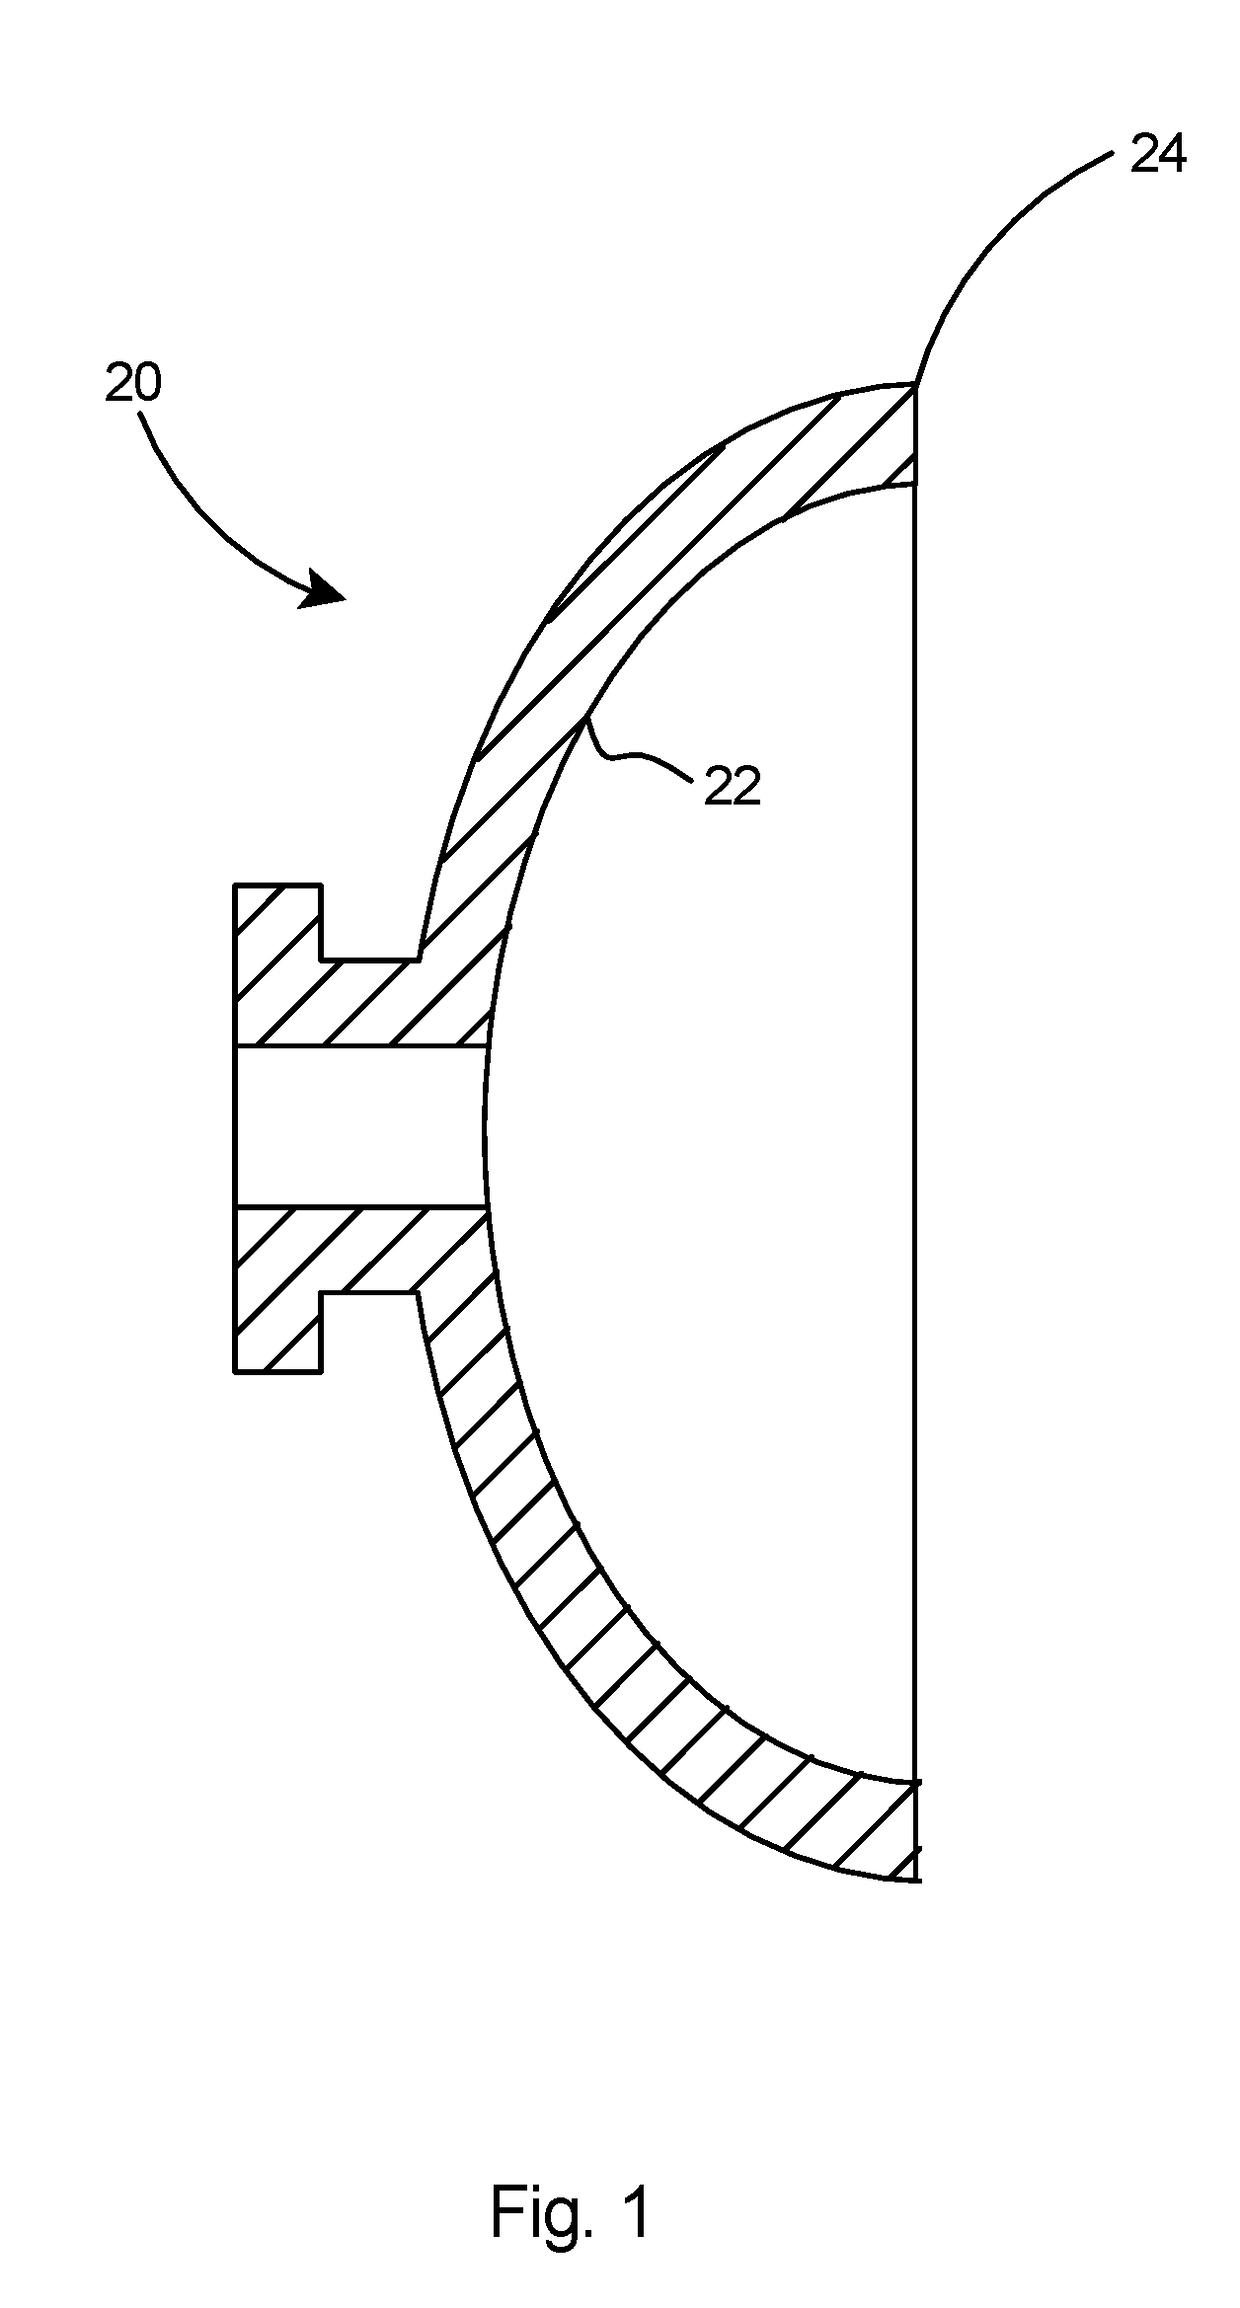 High performance srf accelerator structure and method